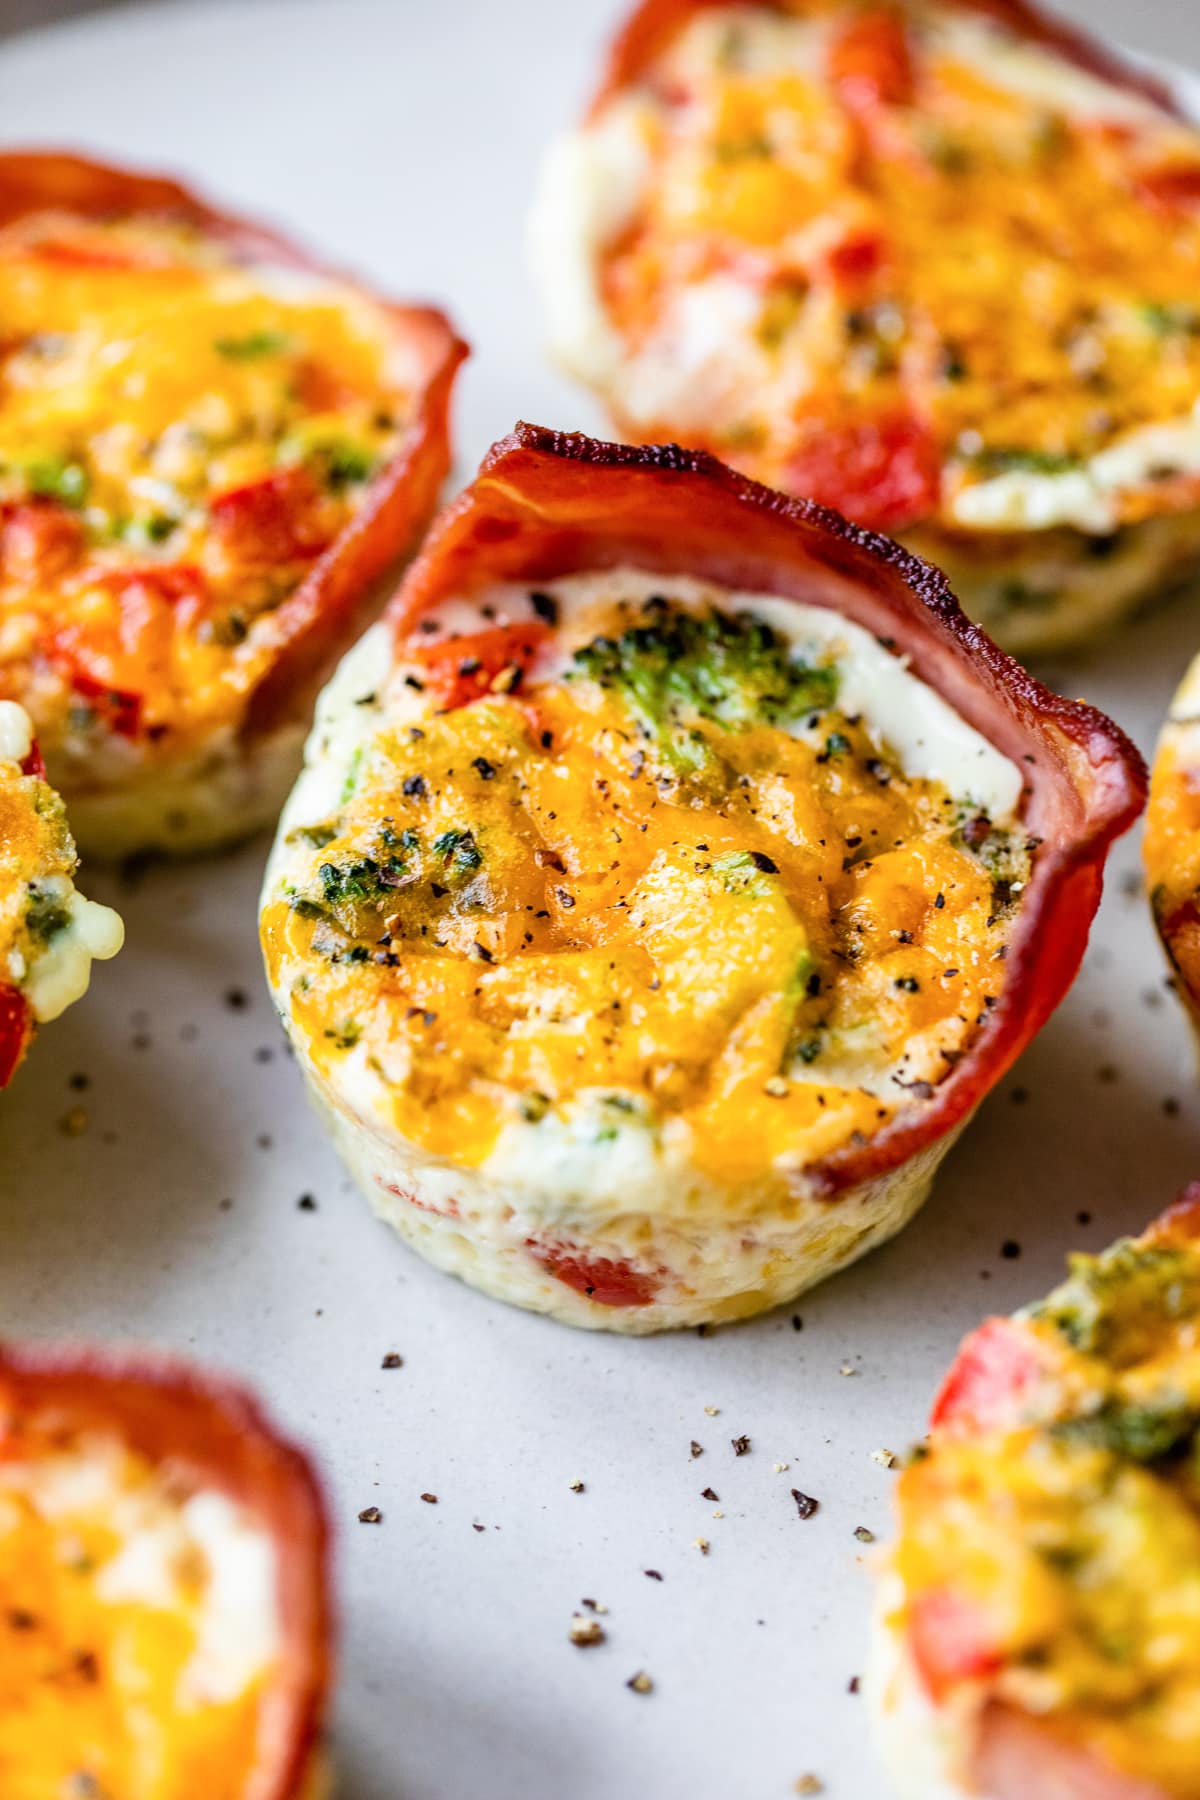 Egg white muffin with turkey bacon, cottage cheese and vegetables